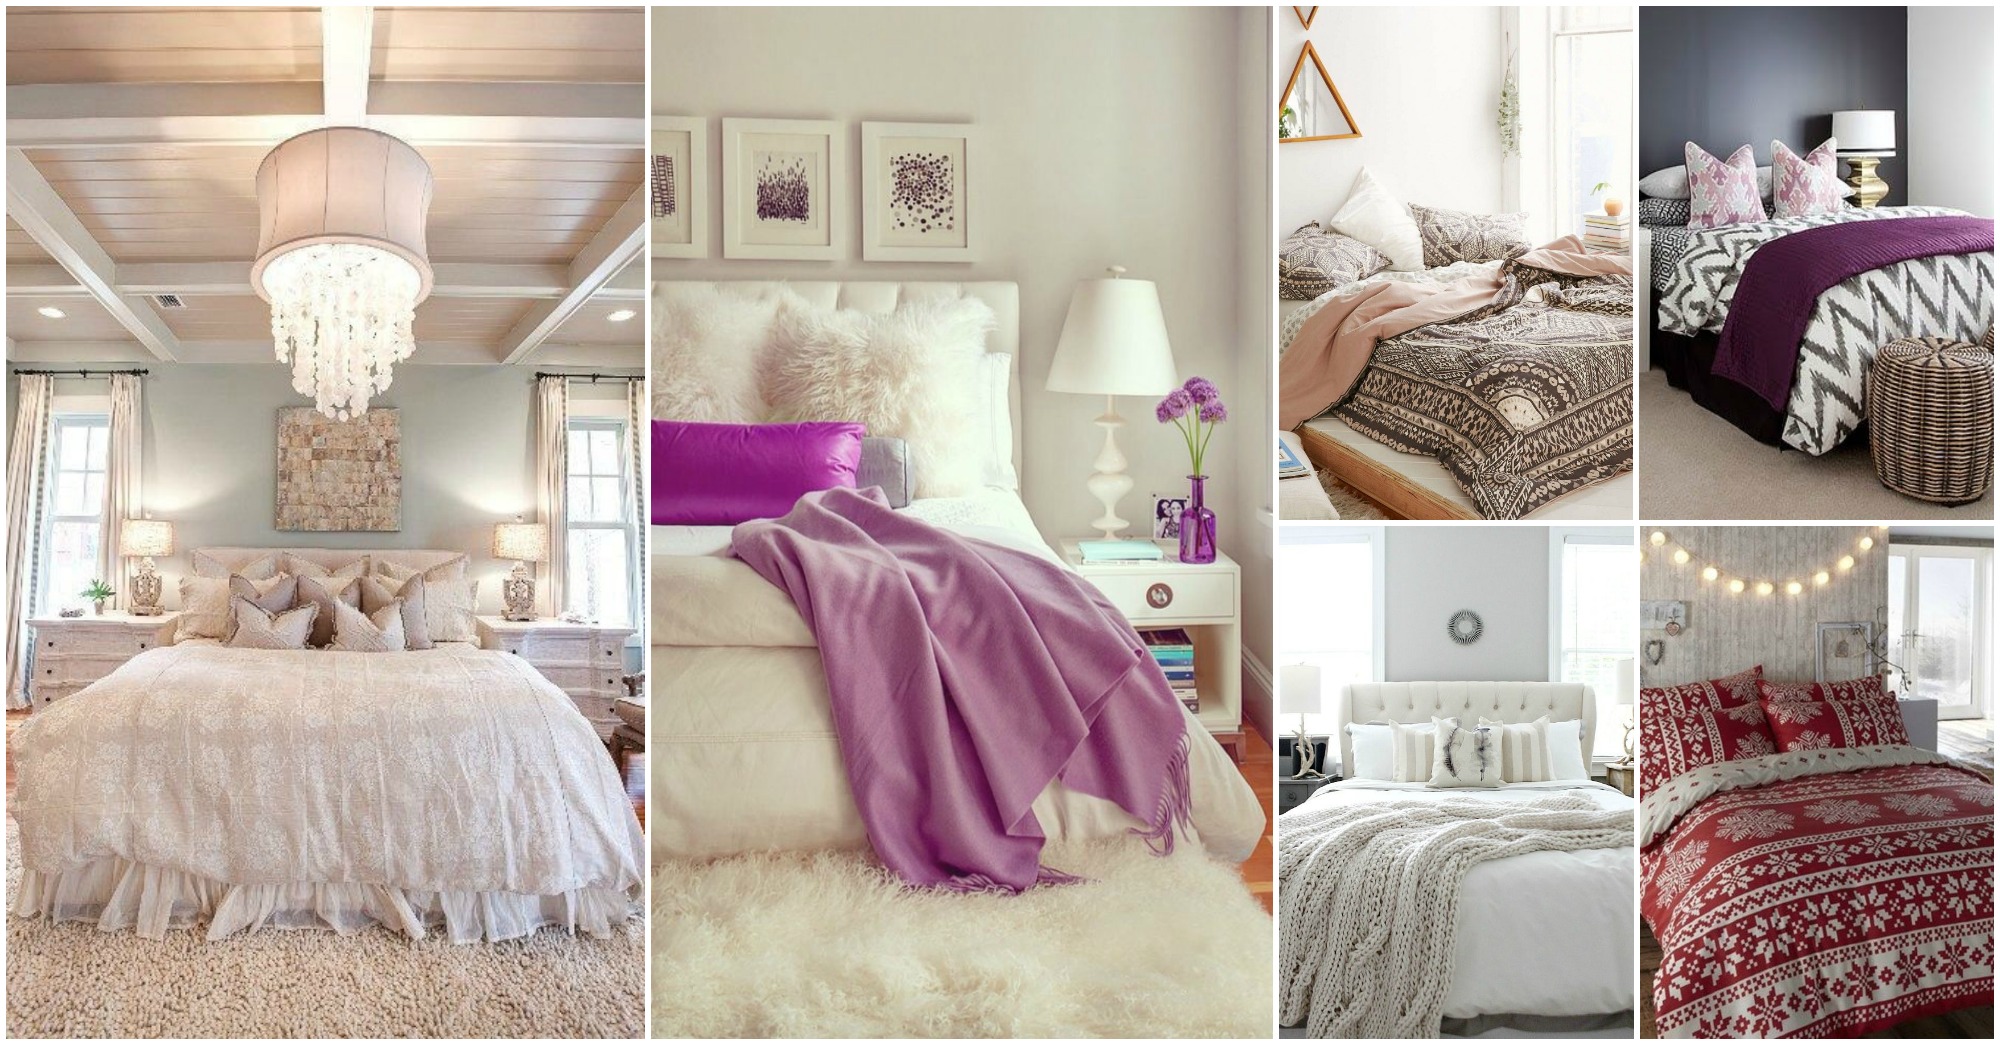 15 + Lovely Bedroom Decor Ideas That Will Steal The Show